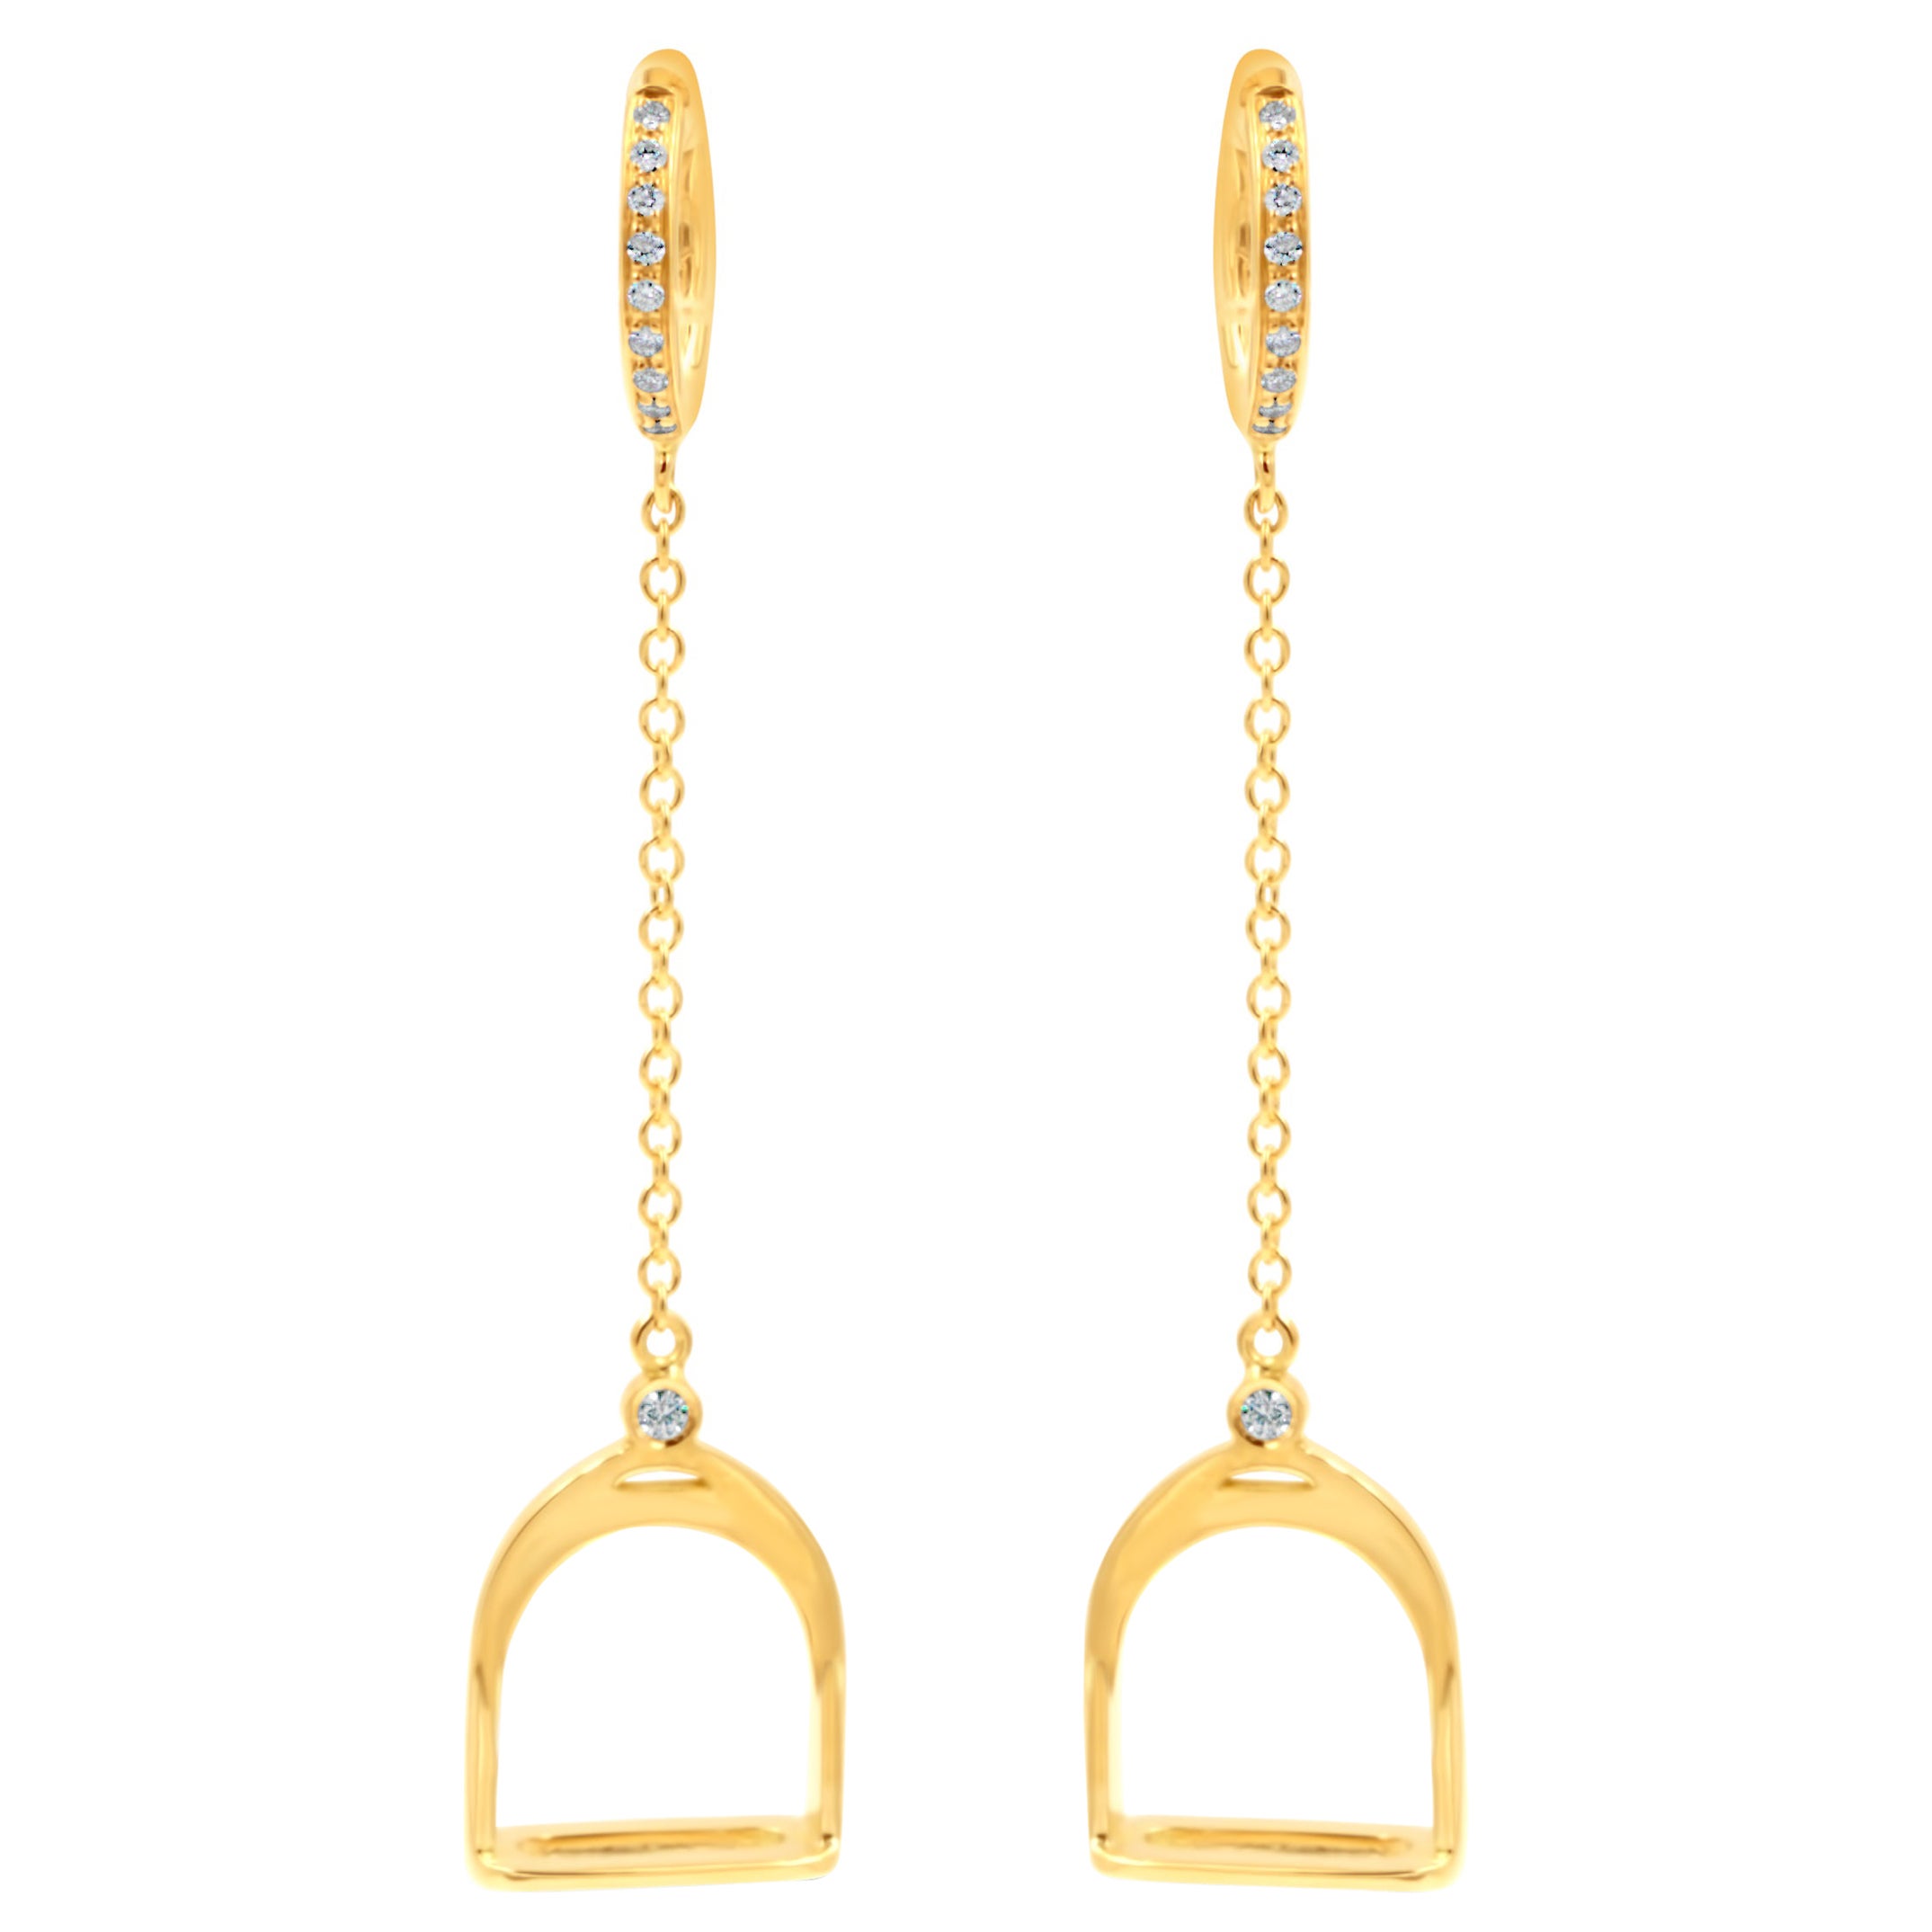 Garavelli 18 Kt Yellow Gold Brown Diamonds Stirrups Collection Dangling Earrings For Sale